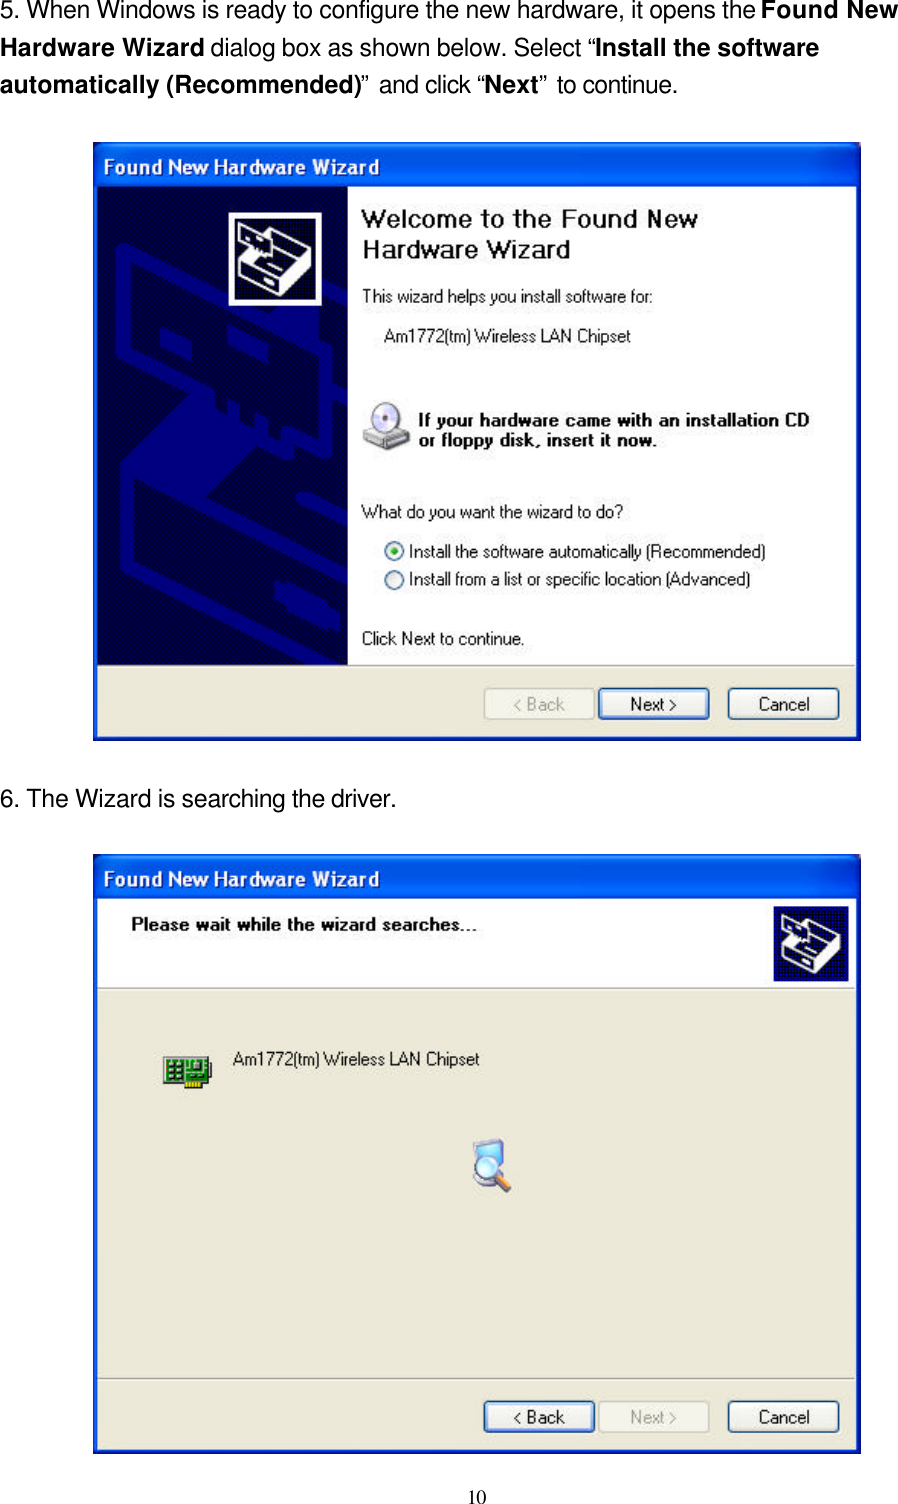  10  5. When Windows is ready to configure the new hardware, it opens the Found New Hardware Wizard dialog box as shown below. Select “Install the software automatically (Recommended)” and click “Next” to continue.    6. The Wizard is searching the driver.   